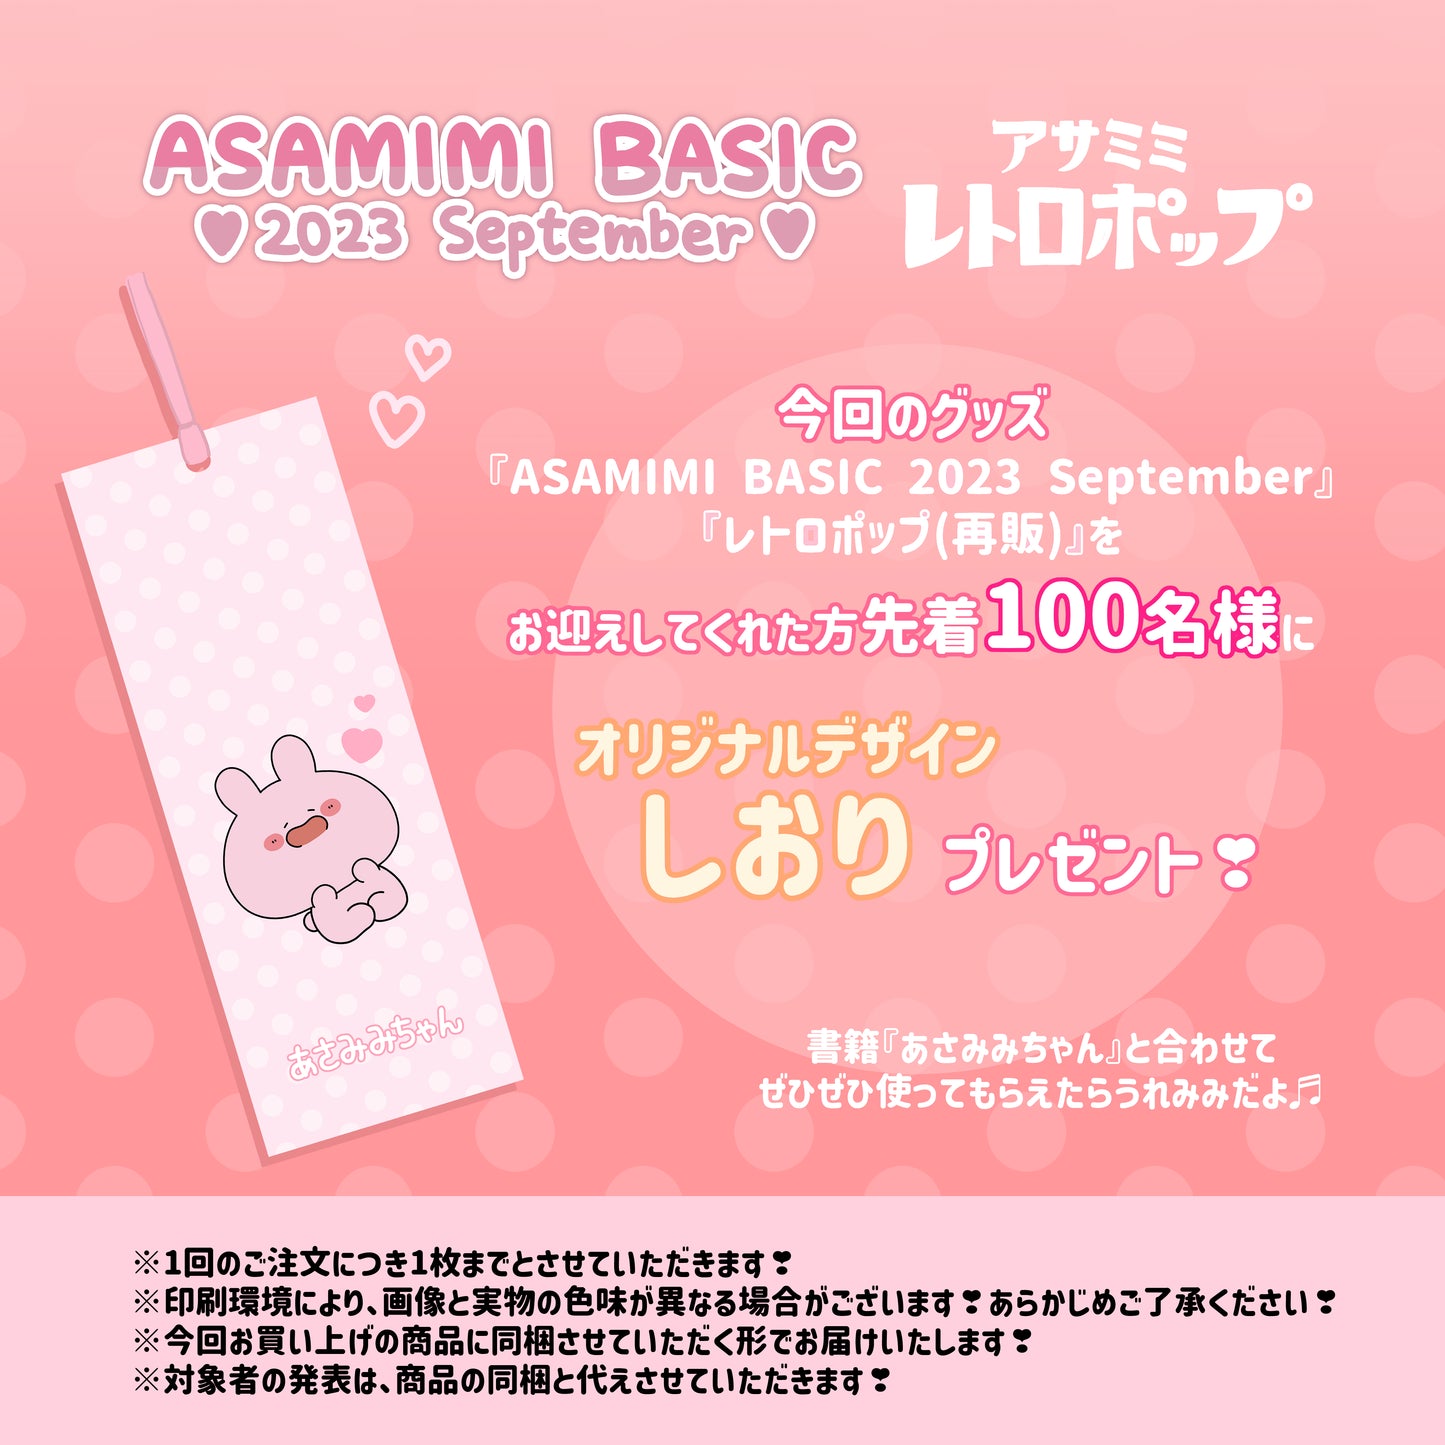 [Asamimi-chan] A must-see for Asami people ❣ Random heart can badge complete set (all 3 types) (ASAMIMI BASIC 2023 September) [Shipped in mid-November]